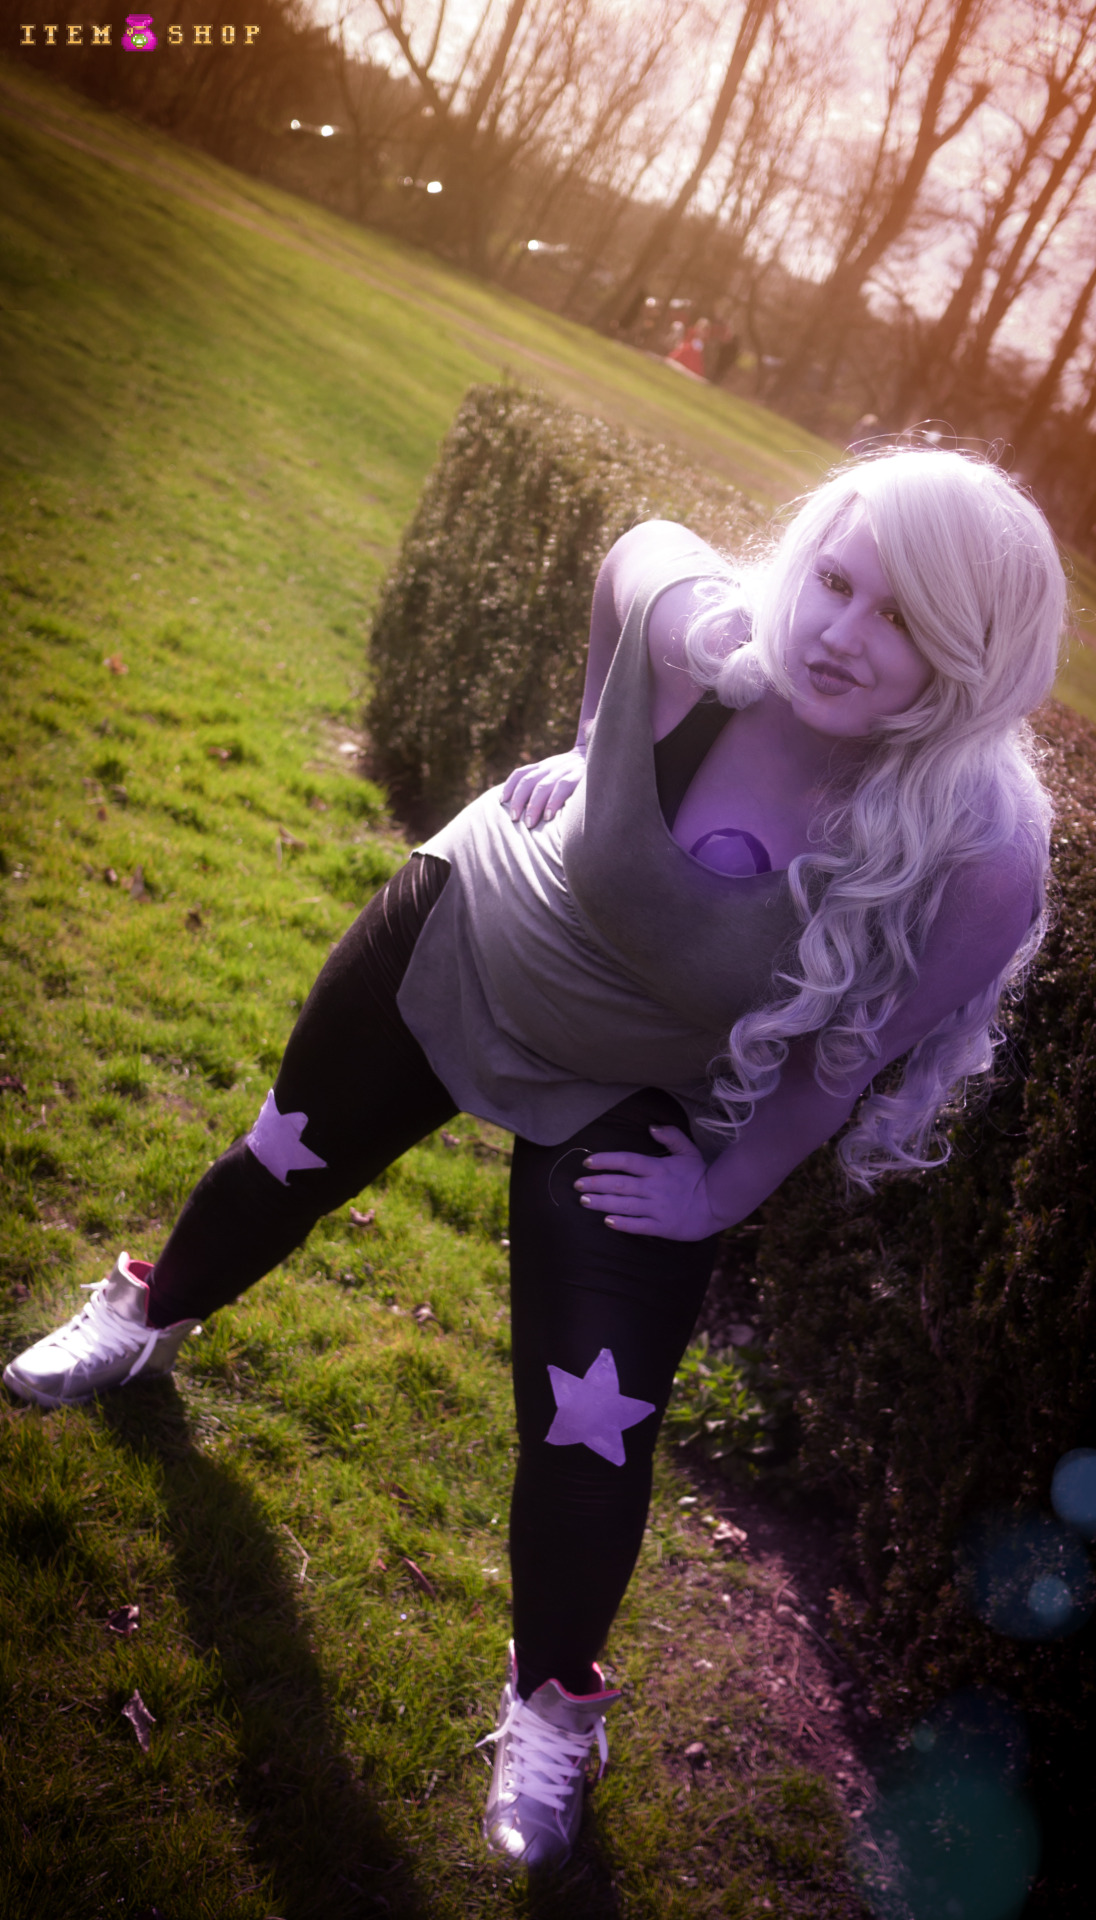 glasmond:  Some pictures of my Amethyst Cosplay!   O oO &lt;3 &lt;3 &lt;3